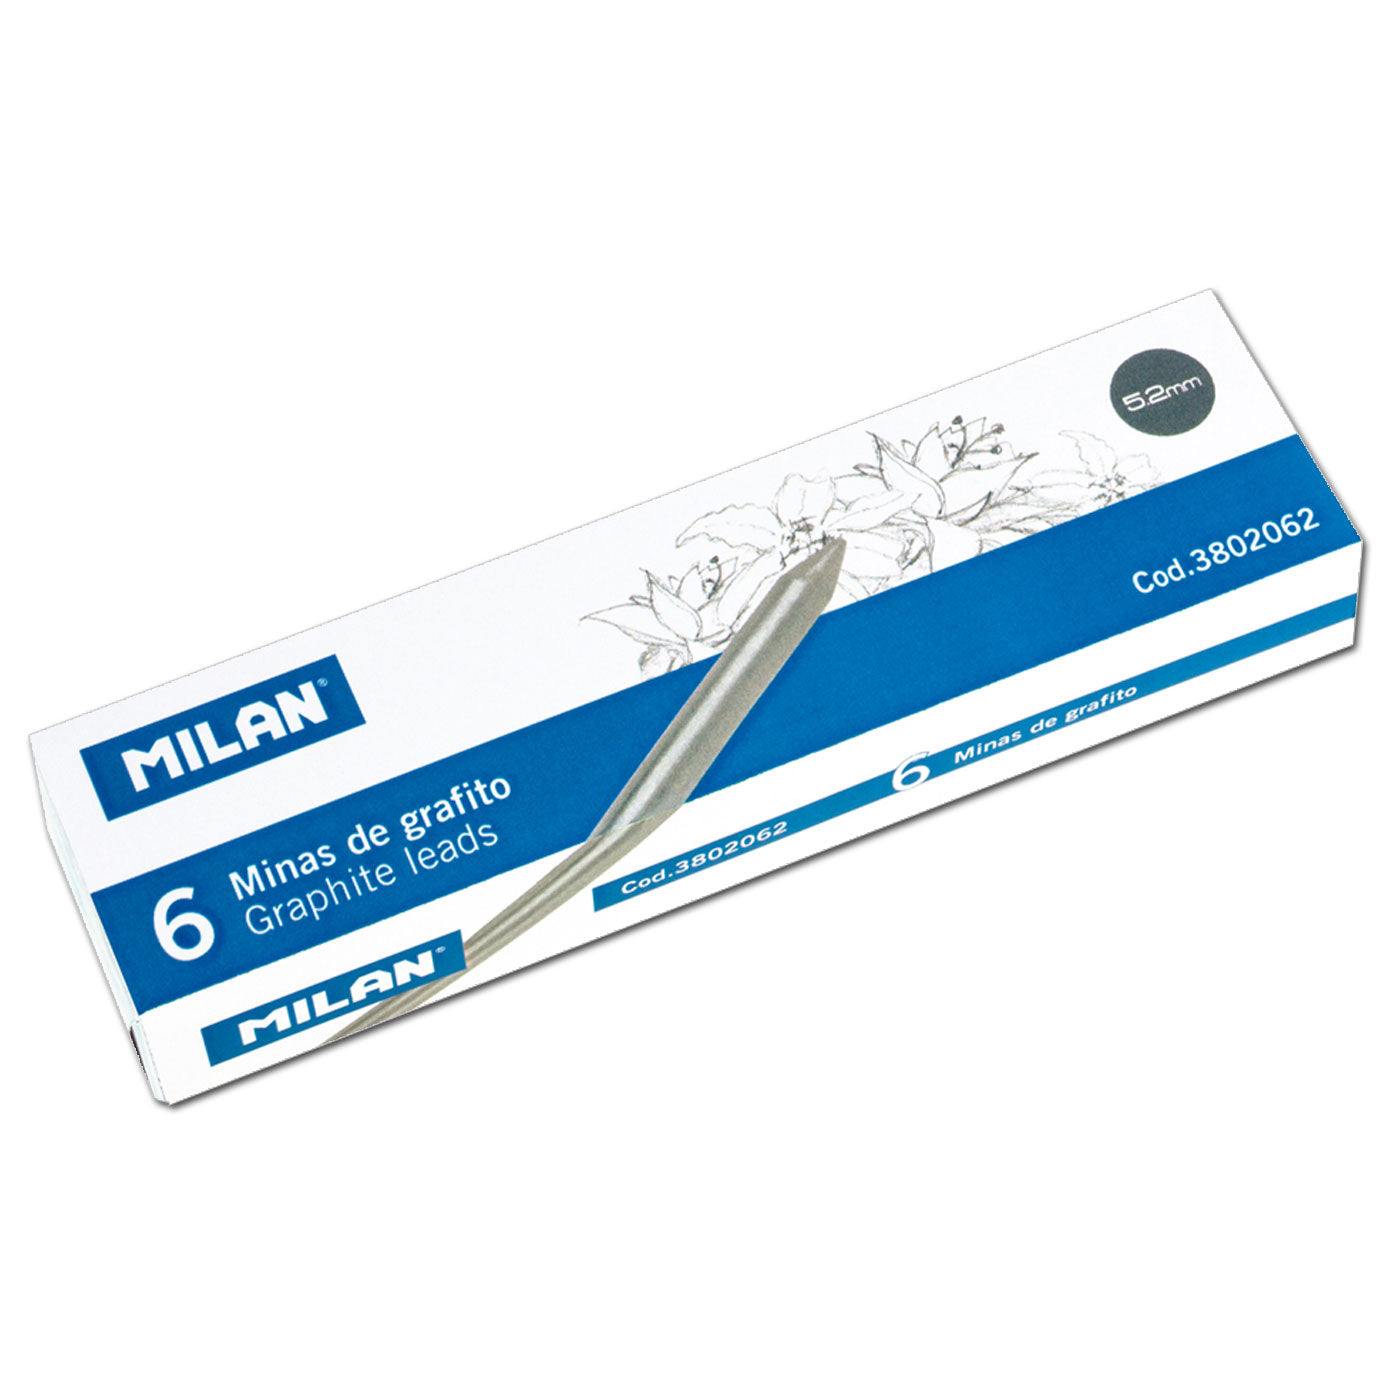 Milan 5.2mm Lead B for Mechanical Pencil Pack of 6